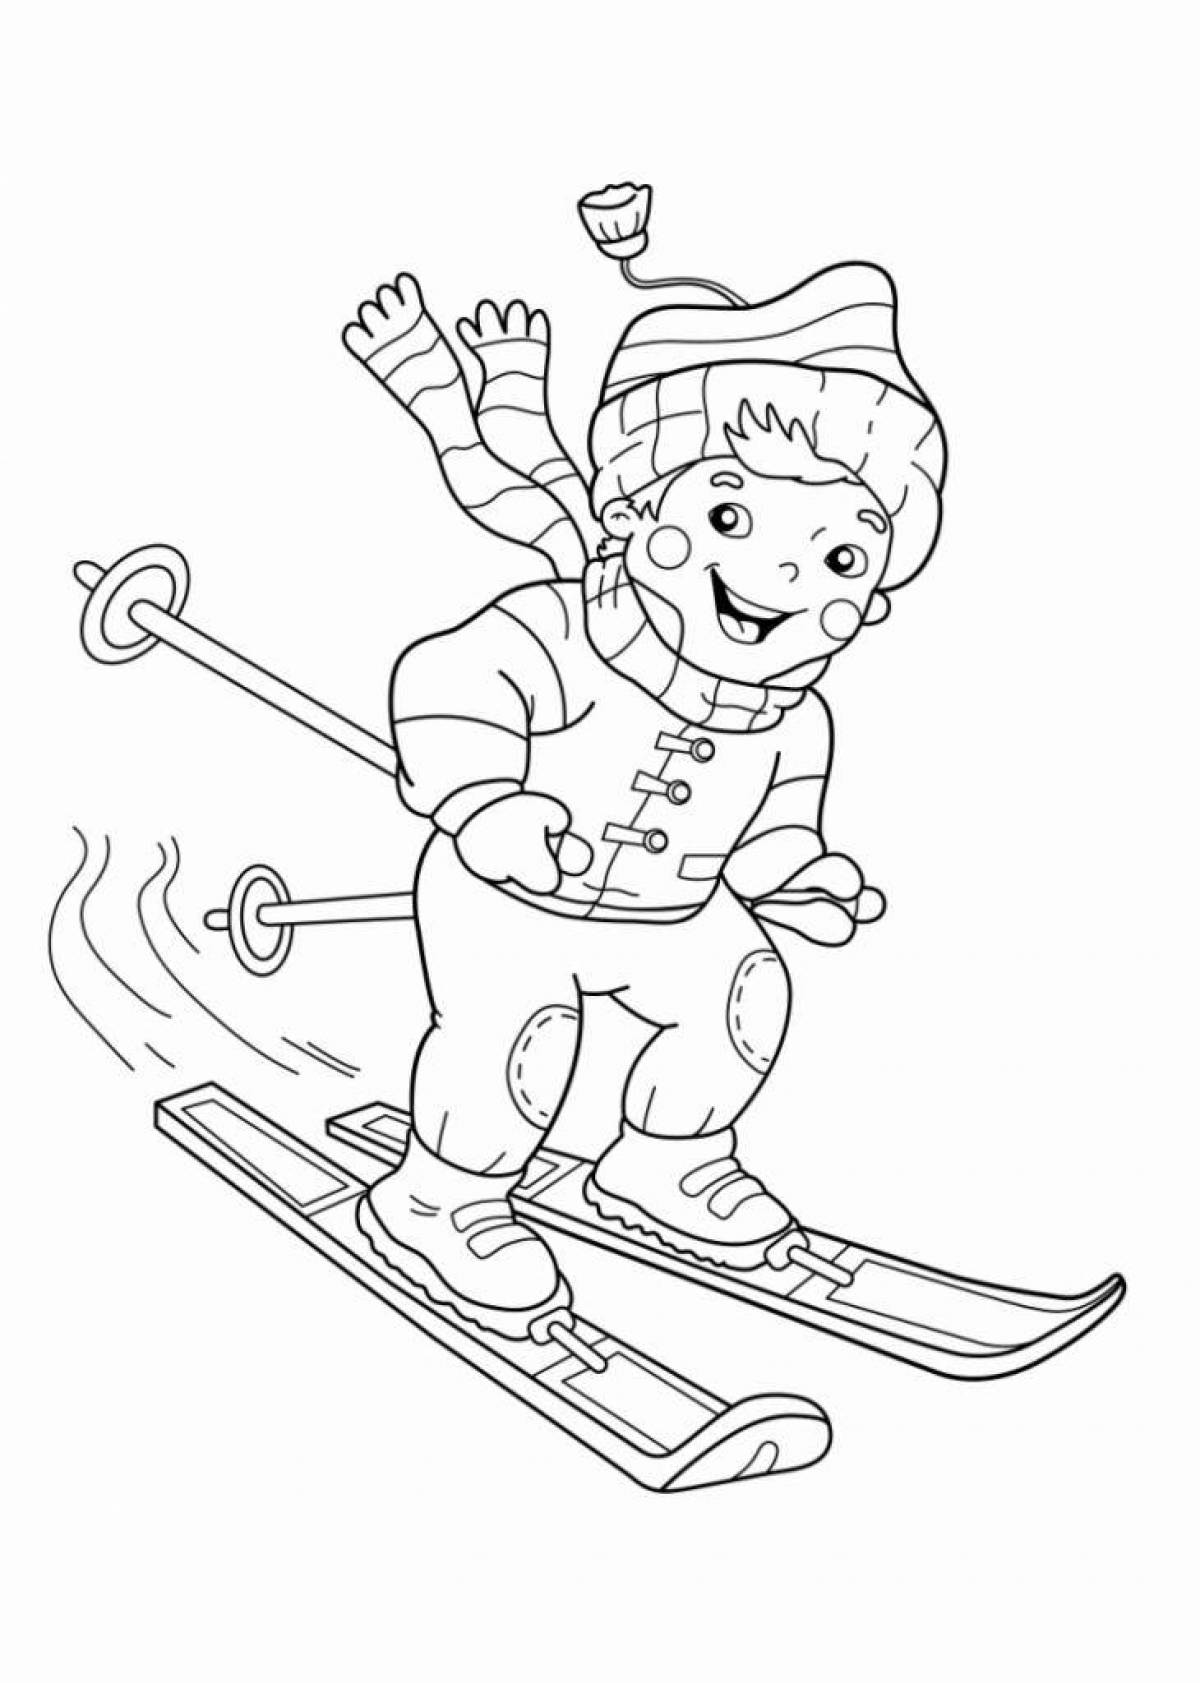 Coloring page playful boy skiing